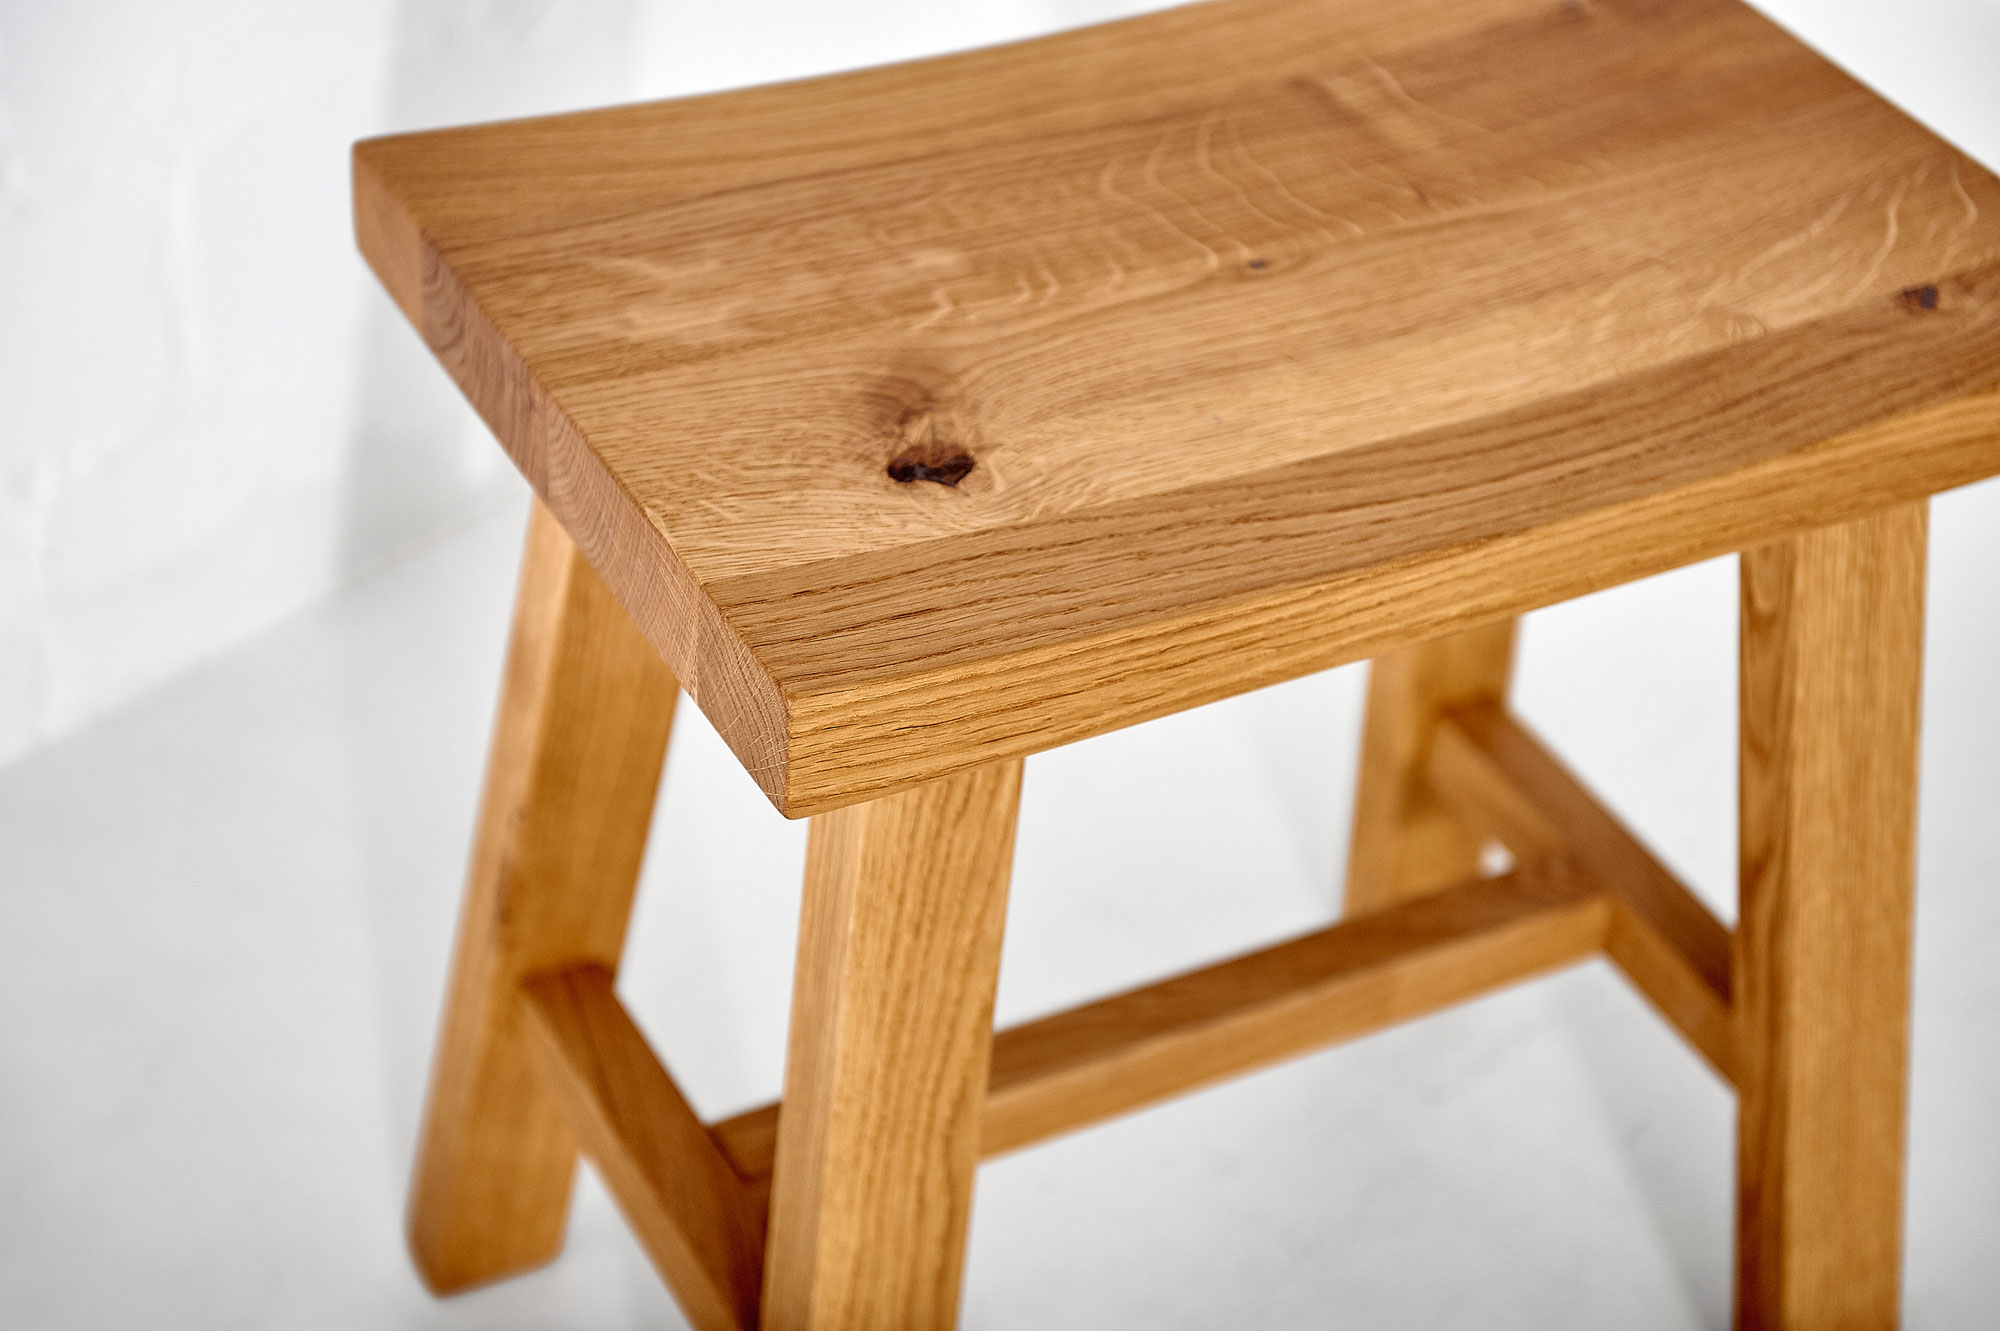 Wooden Stool TUBER Edited custom made in solid wood by vitamin design